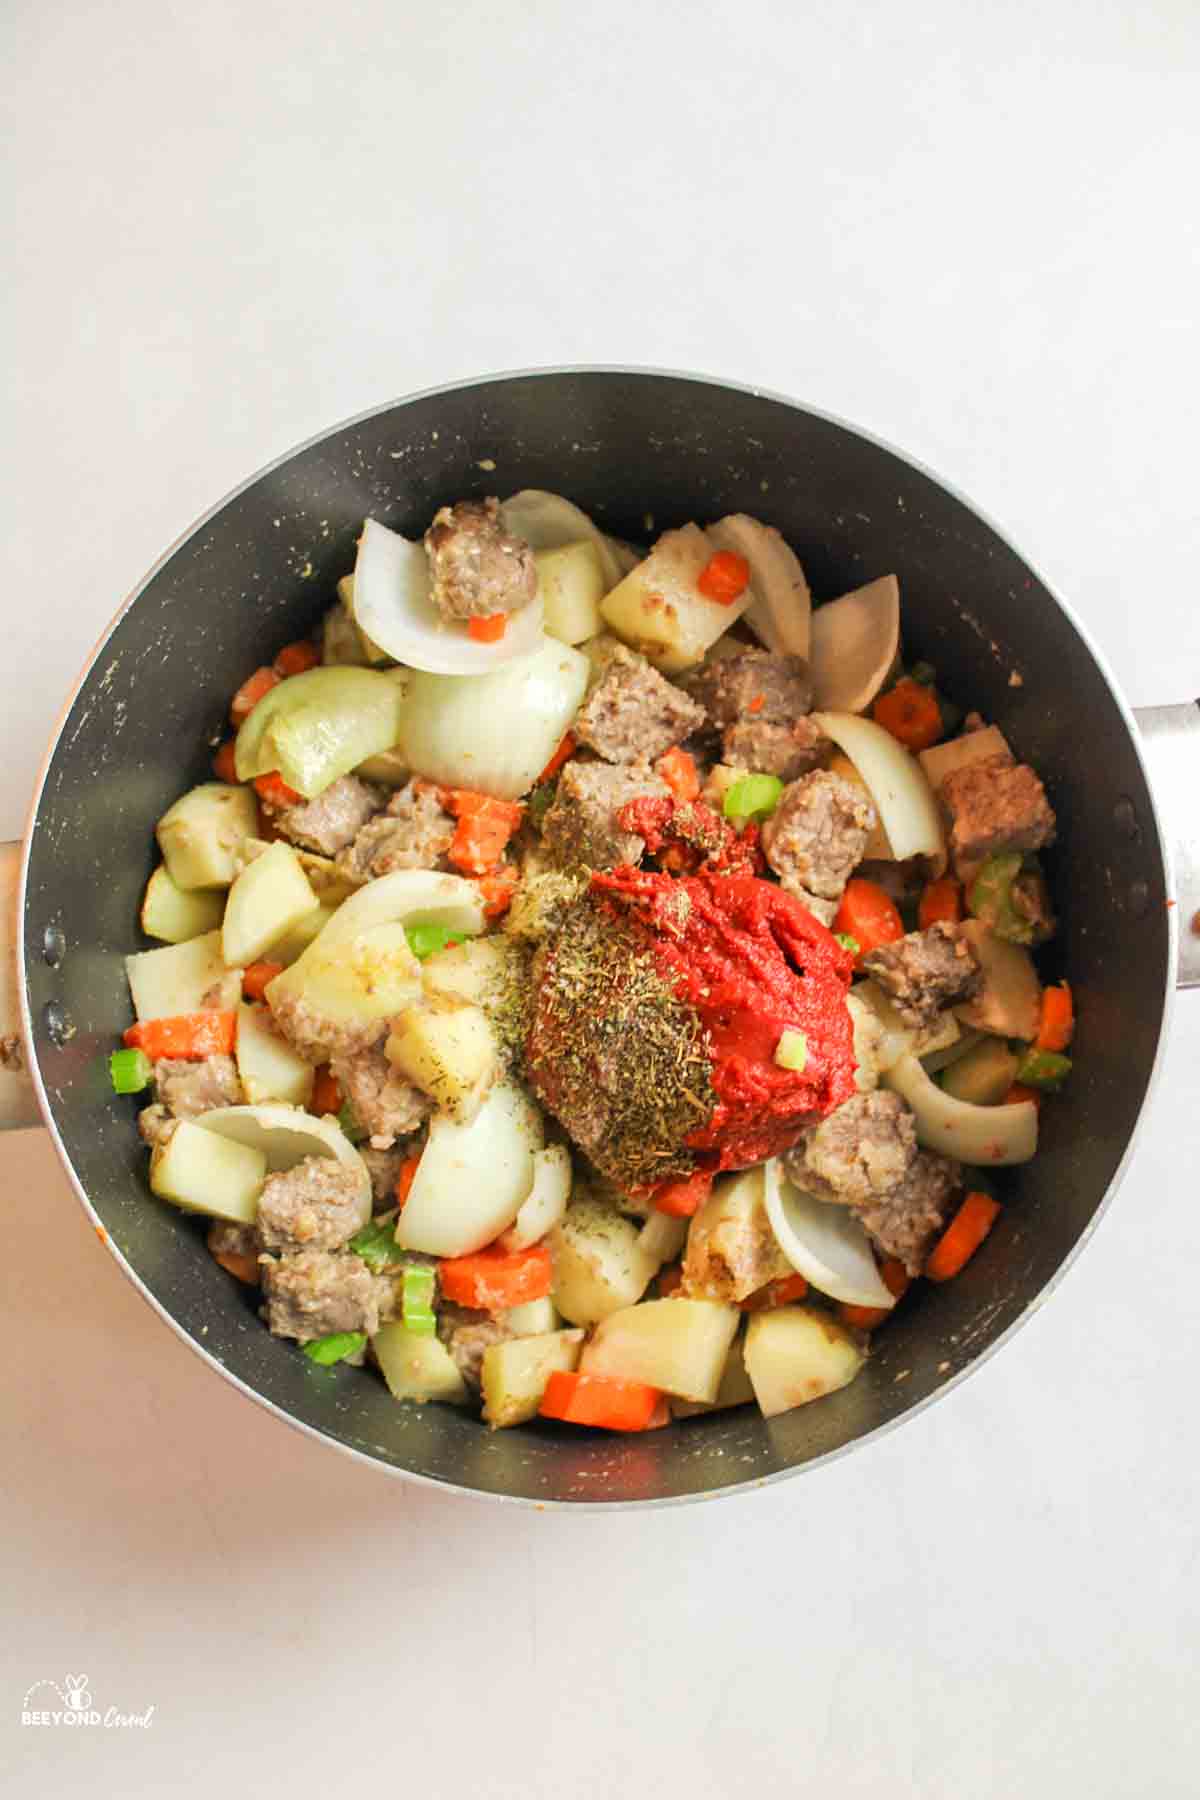 tomato paste and seasonings added to large pot with cooked veggies and stew meat